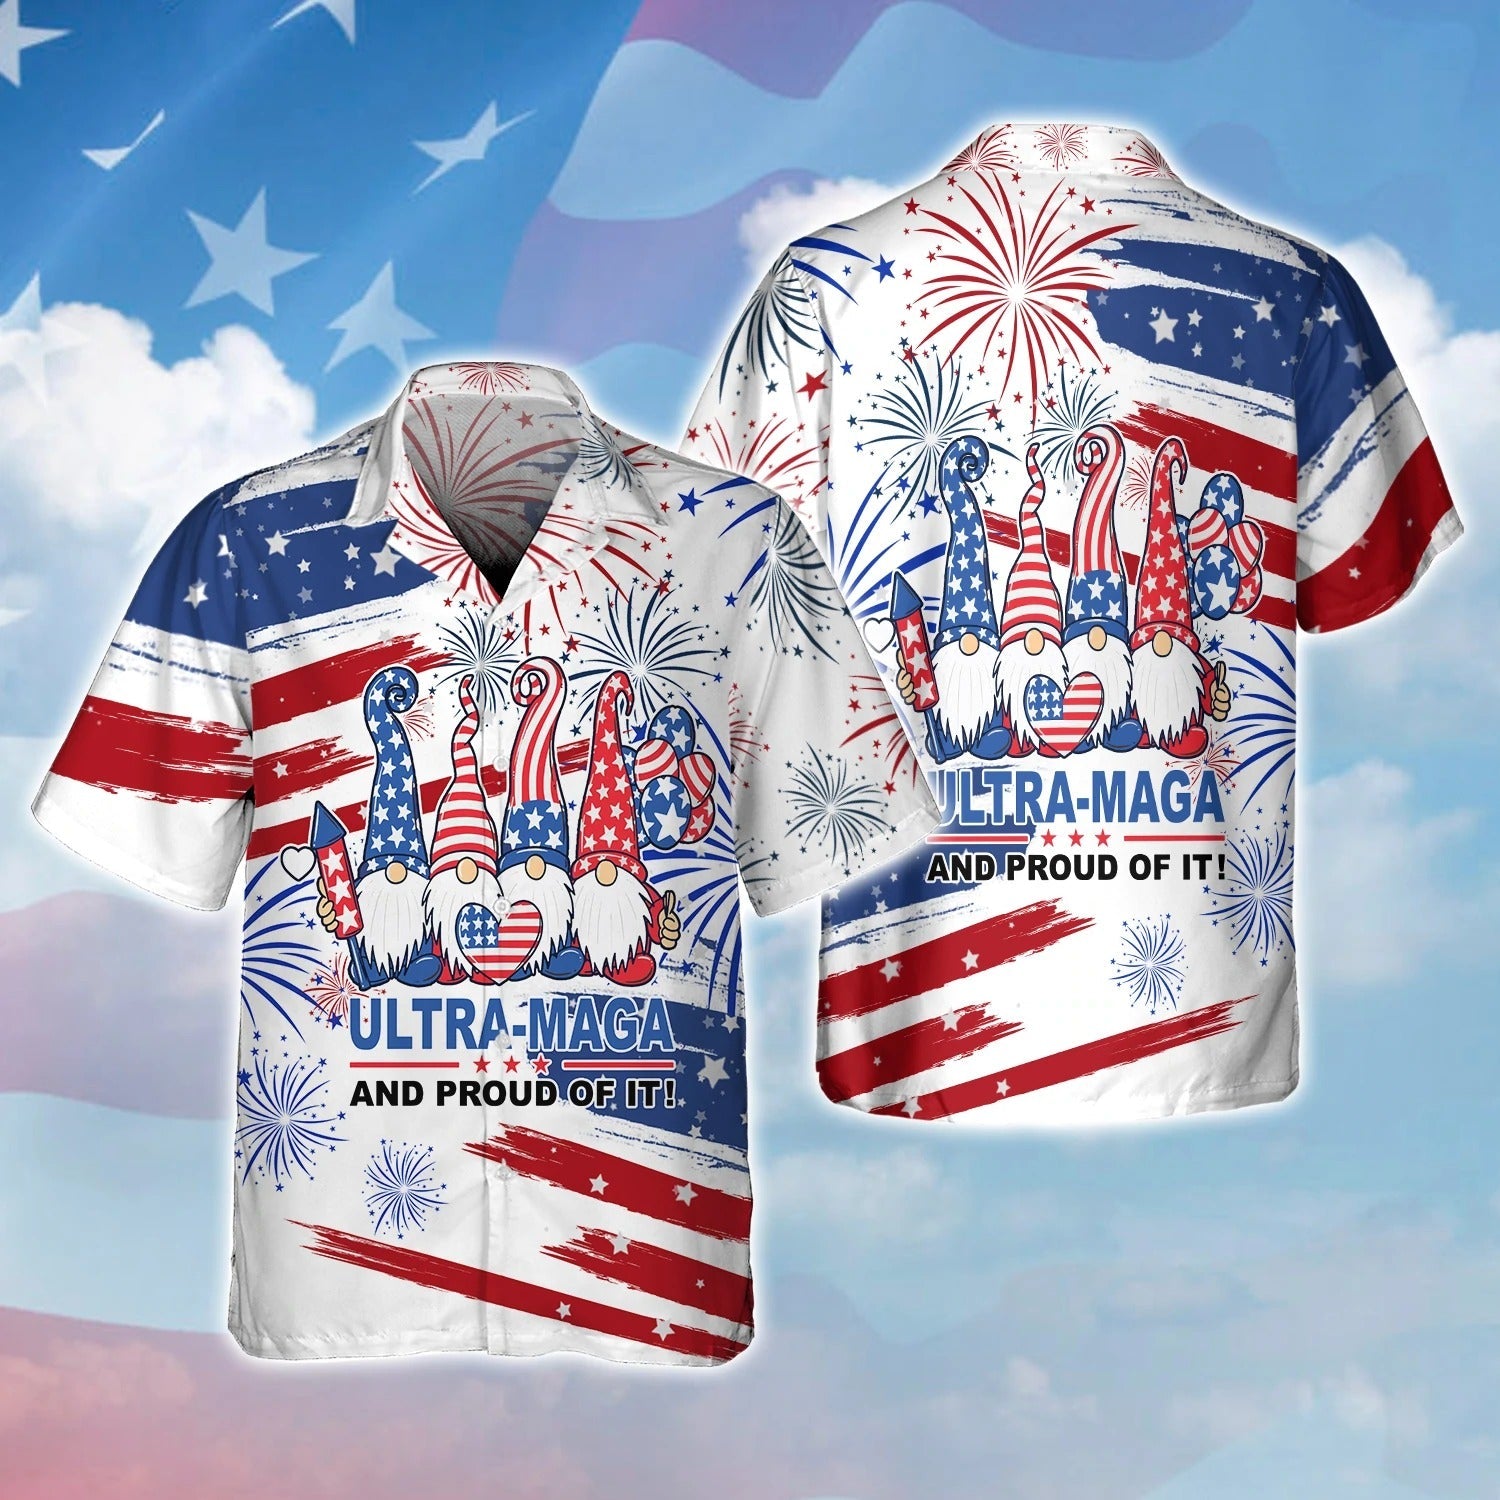 3D Full Print Ultra Maga And Proud Of It Hawaiian Shirt For Independence''S Day/ American Fourth Of Jul Gifts